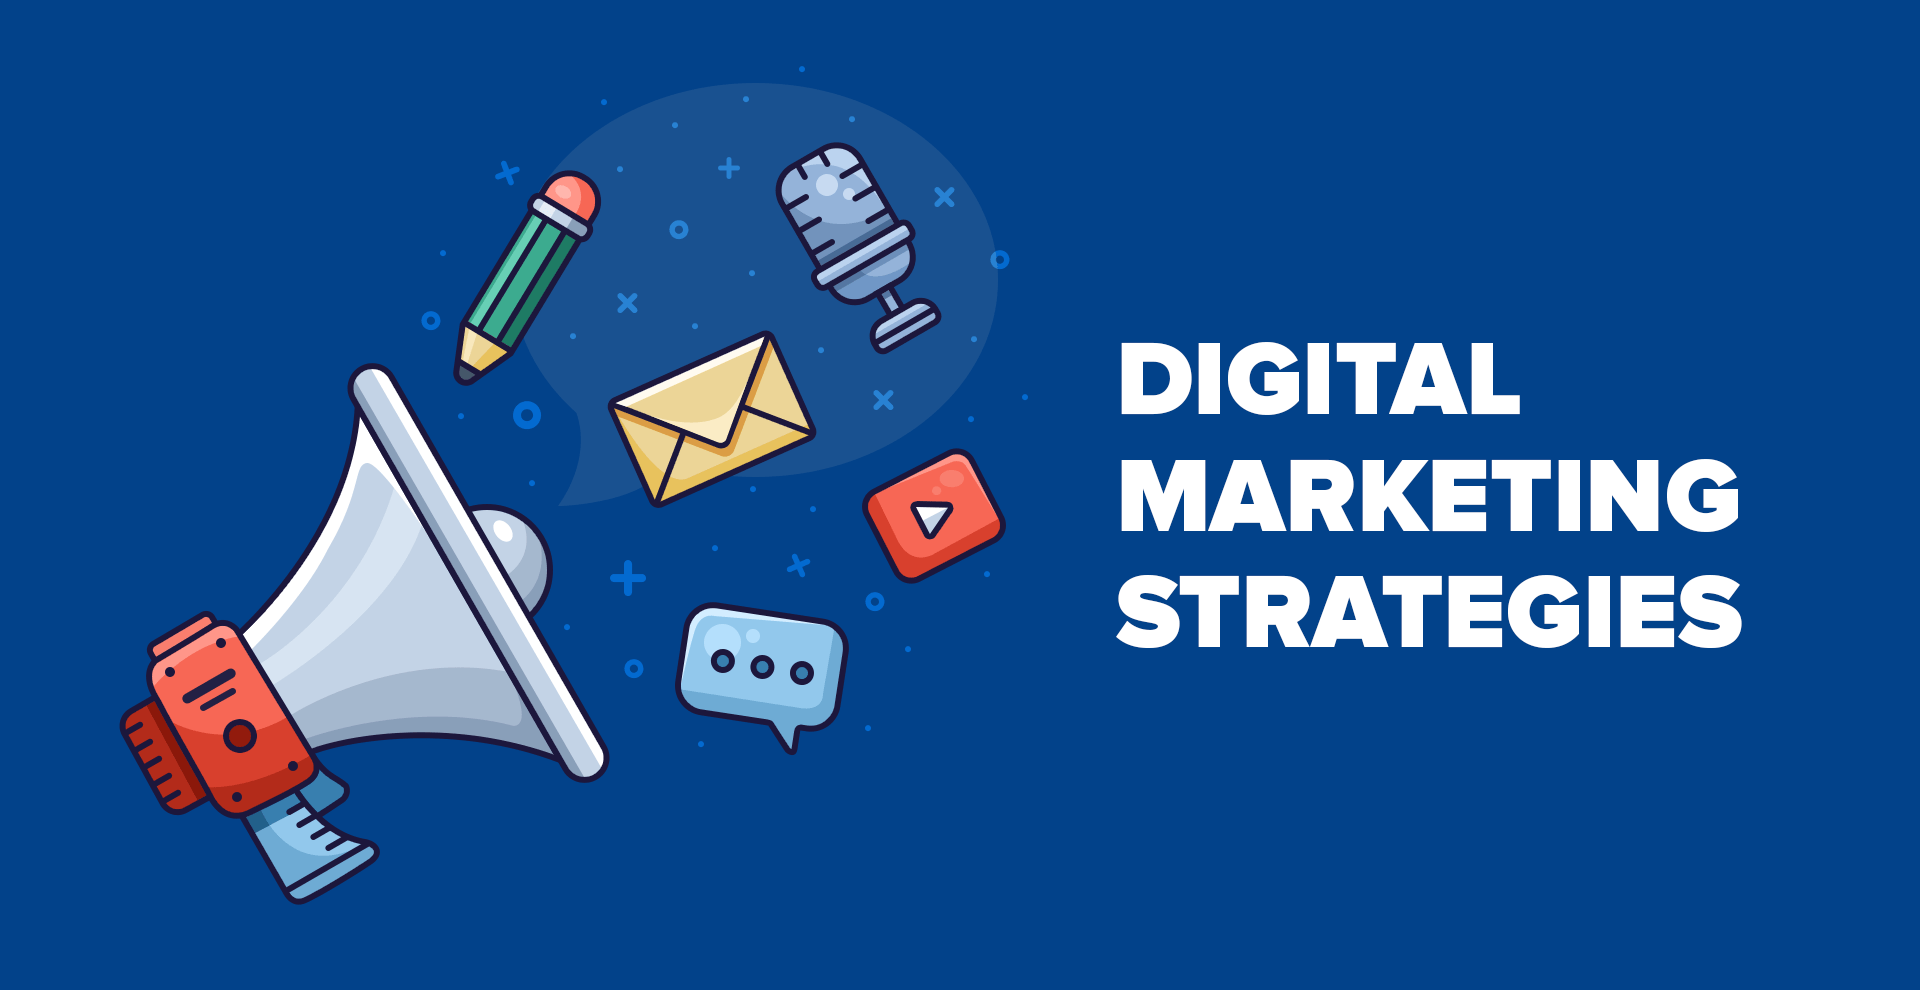 Plan Your Digital Marketing Strategies with the Industry Leaders at Digital Concepts